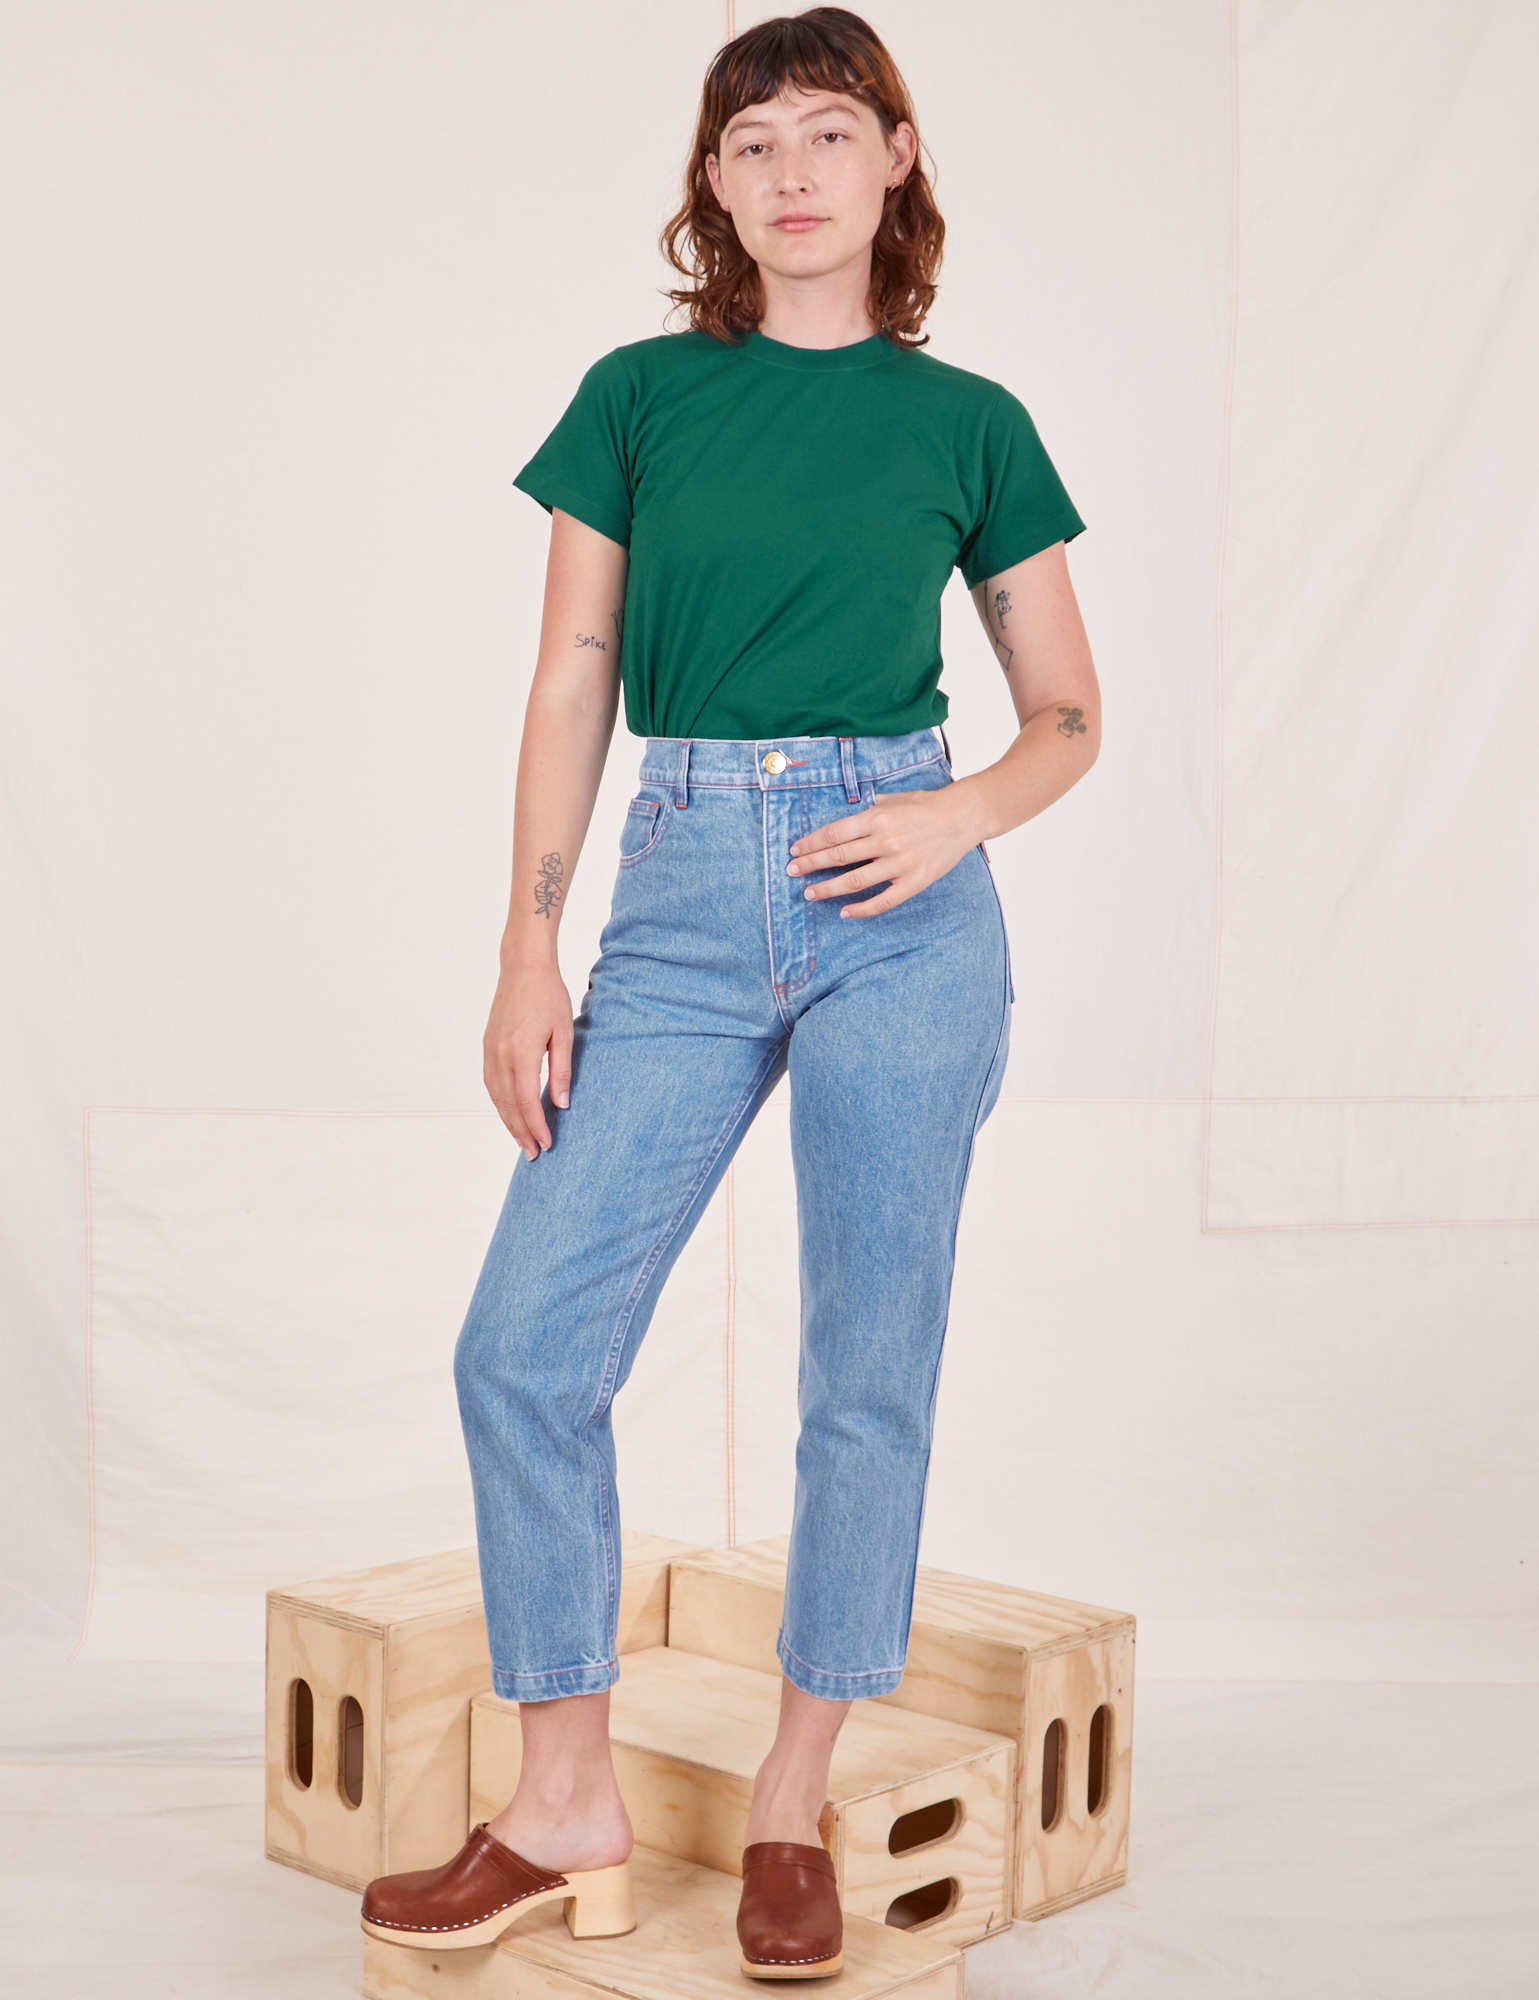 Alex is wearing Organic Vintage Tee in Hunter Green and light wash Frontier Jeans